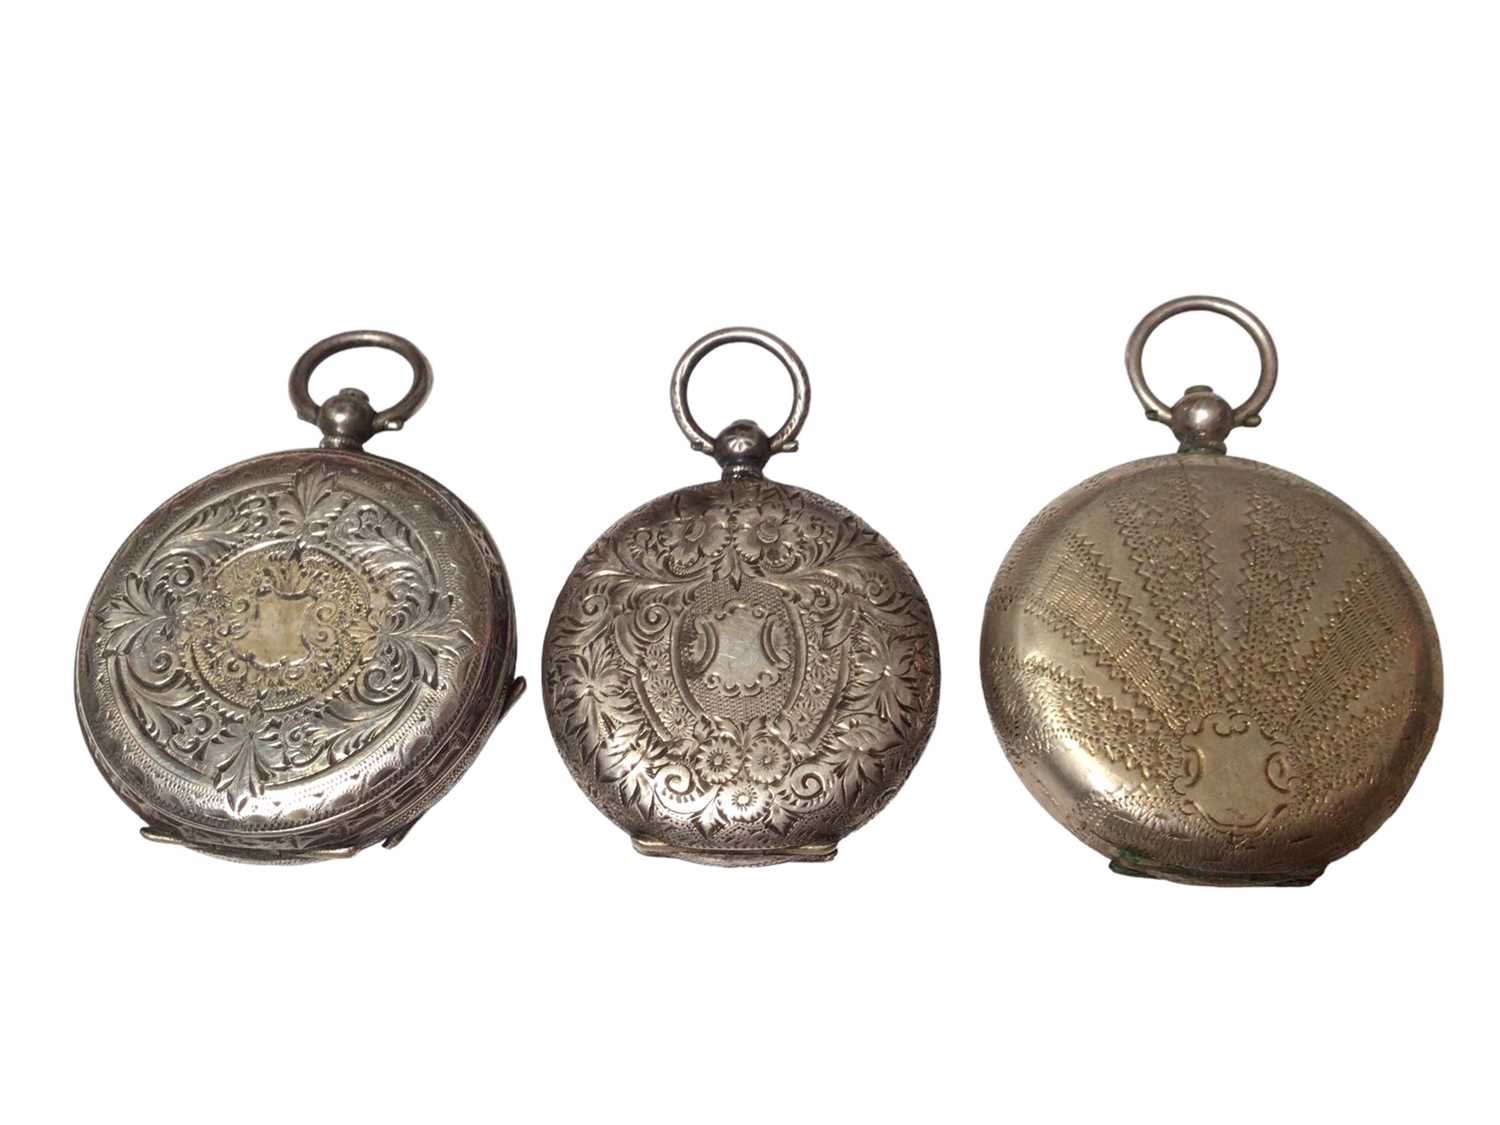 Three late 19th century ladies silver fob watches with painted and jewelled enamel dials - Image 2 of 3